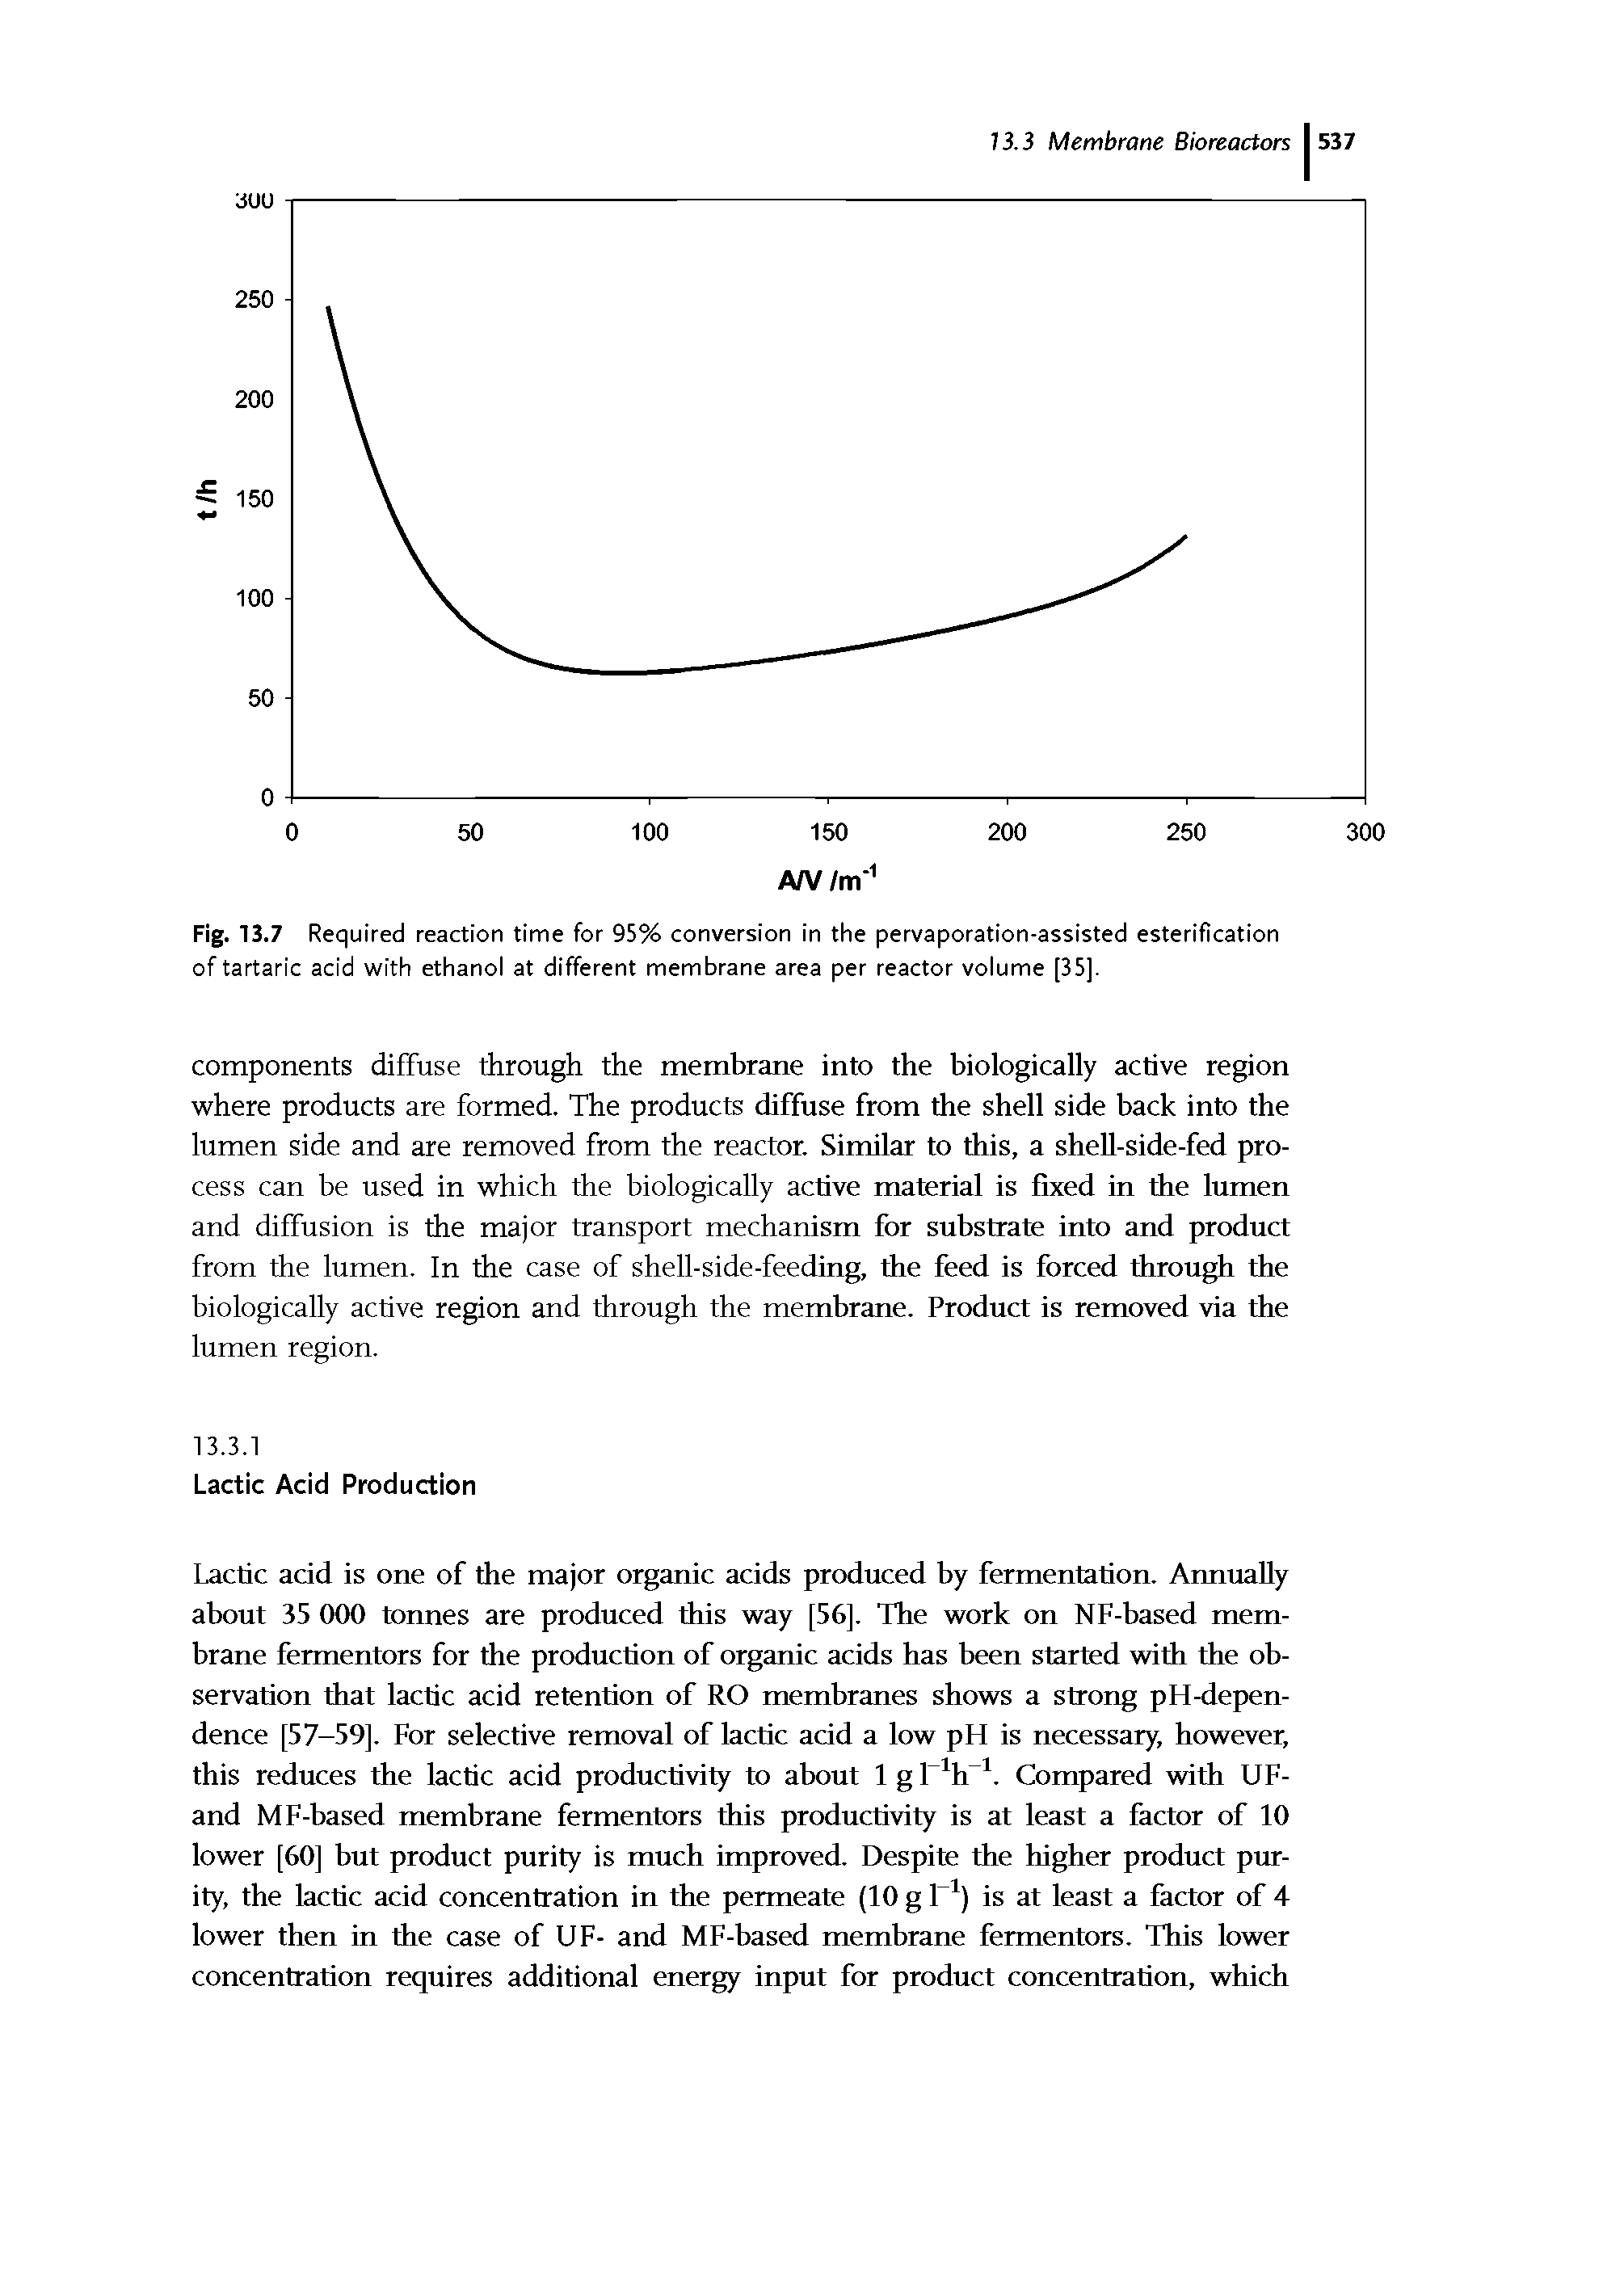 Fig. 13.7 Required reaction time for 95% conversion in the pervaporation-assisted esterification of tartaric acid with ethanol at different membrane area per reactor volume [35].